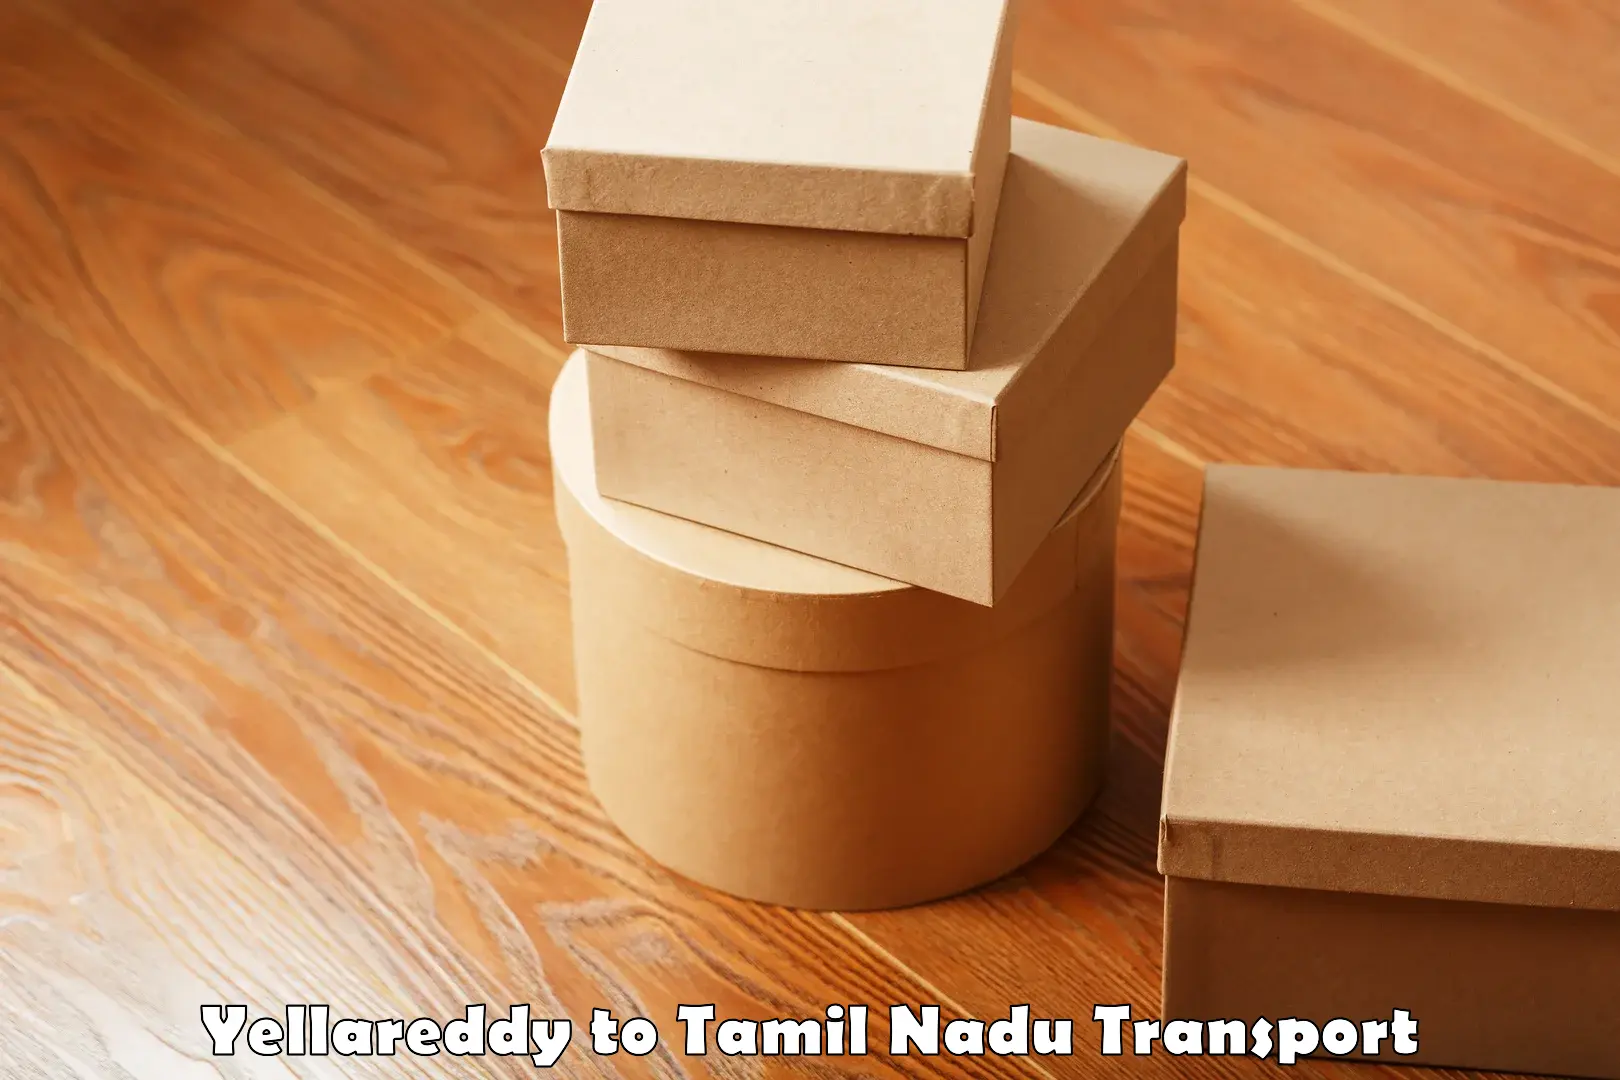 Delivery service Yellareddy to SRM Institute of Science and Technology Chennai